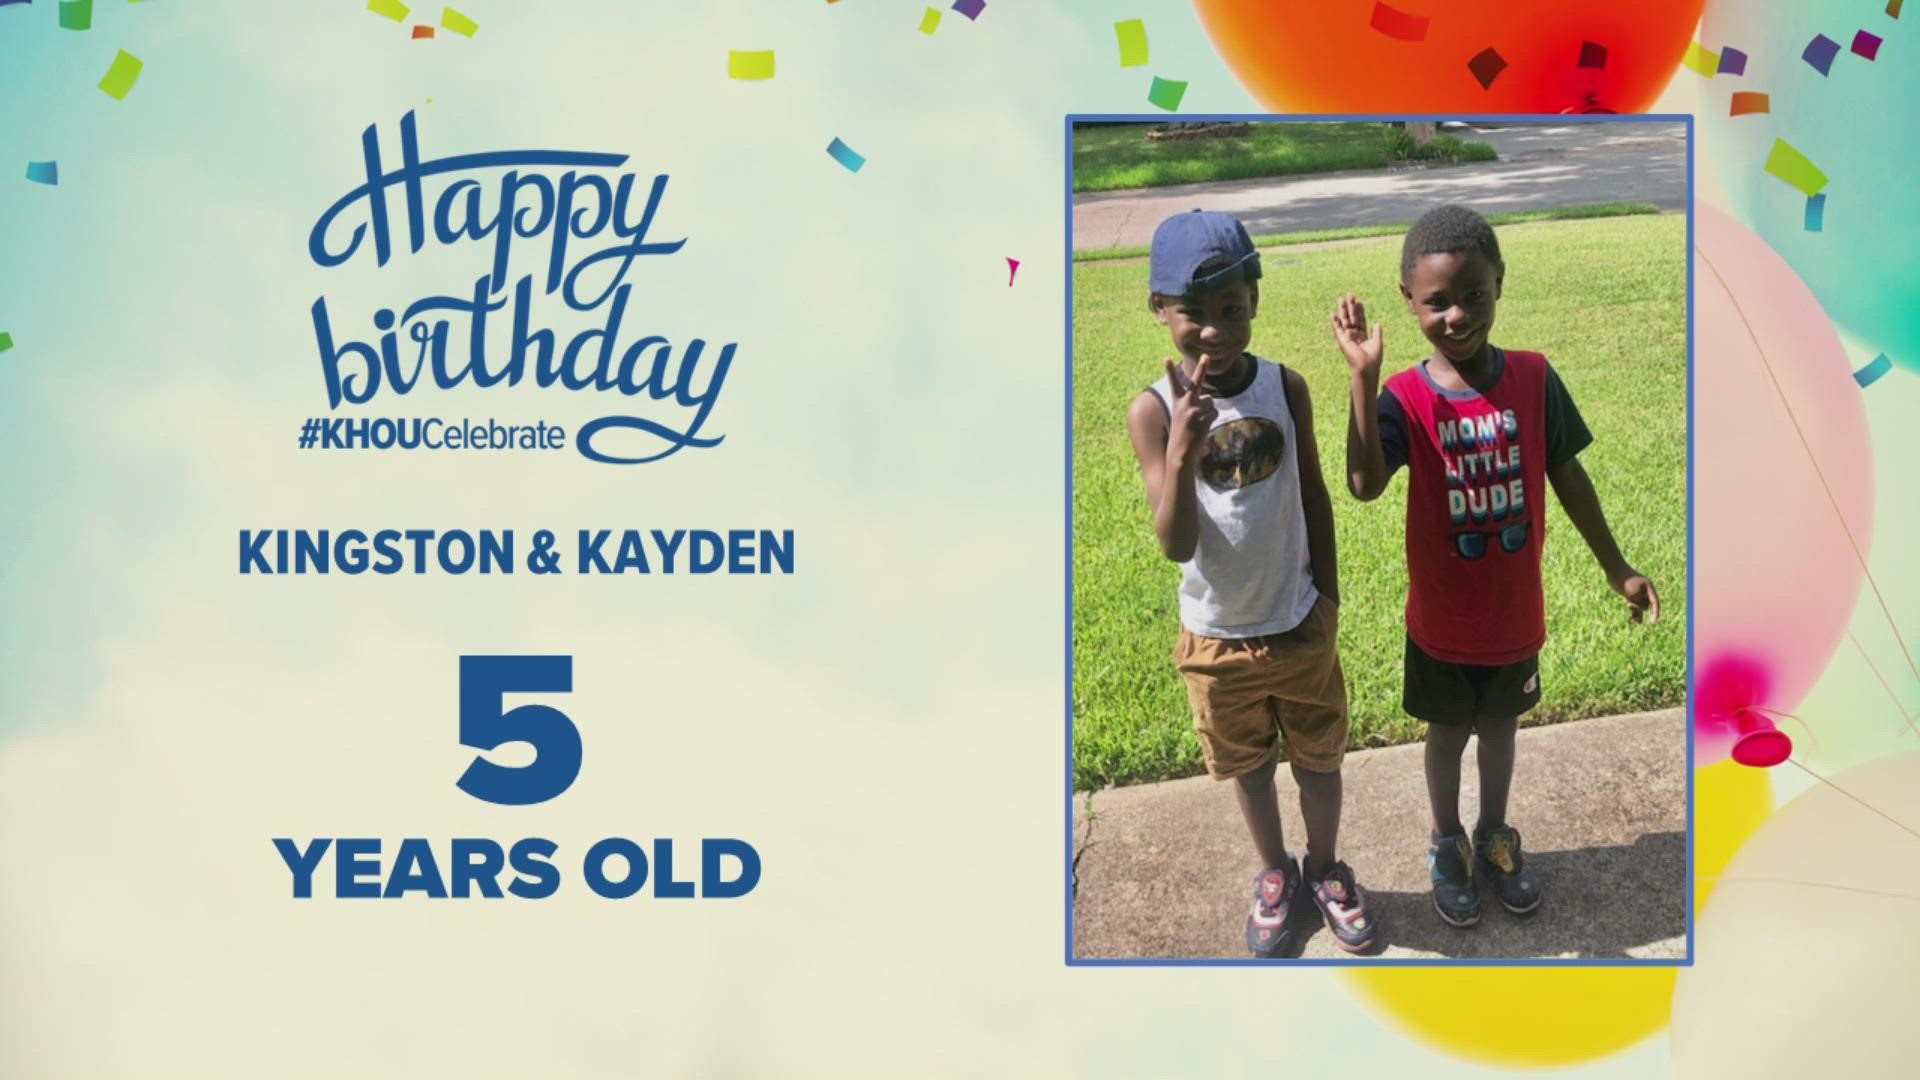 Kingston and Kayden get double the cake and double the gifts on their 5th birthday, plus 28 years of marriage on the 28th.